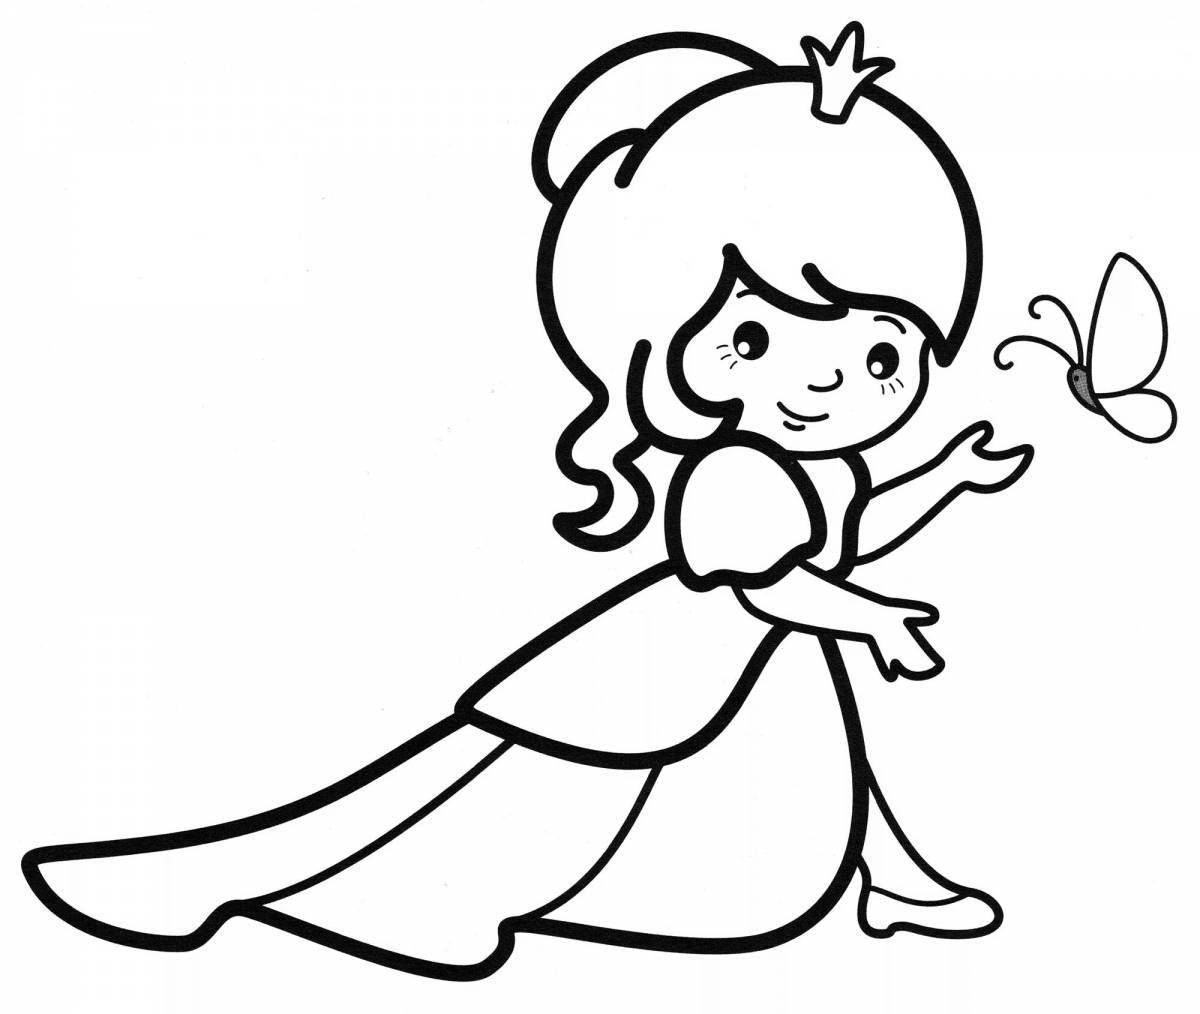 Awesome princess coloring pages for kids